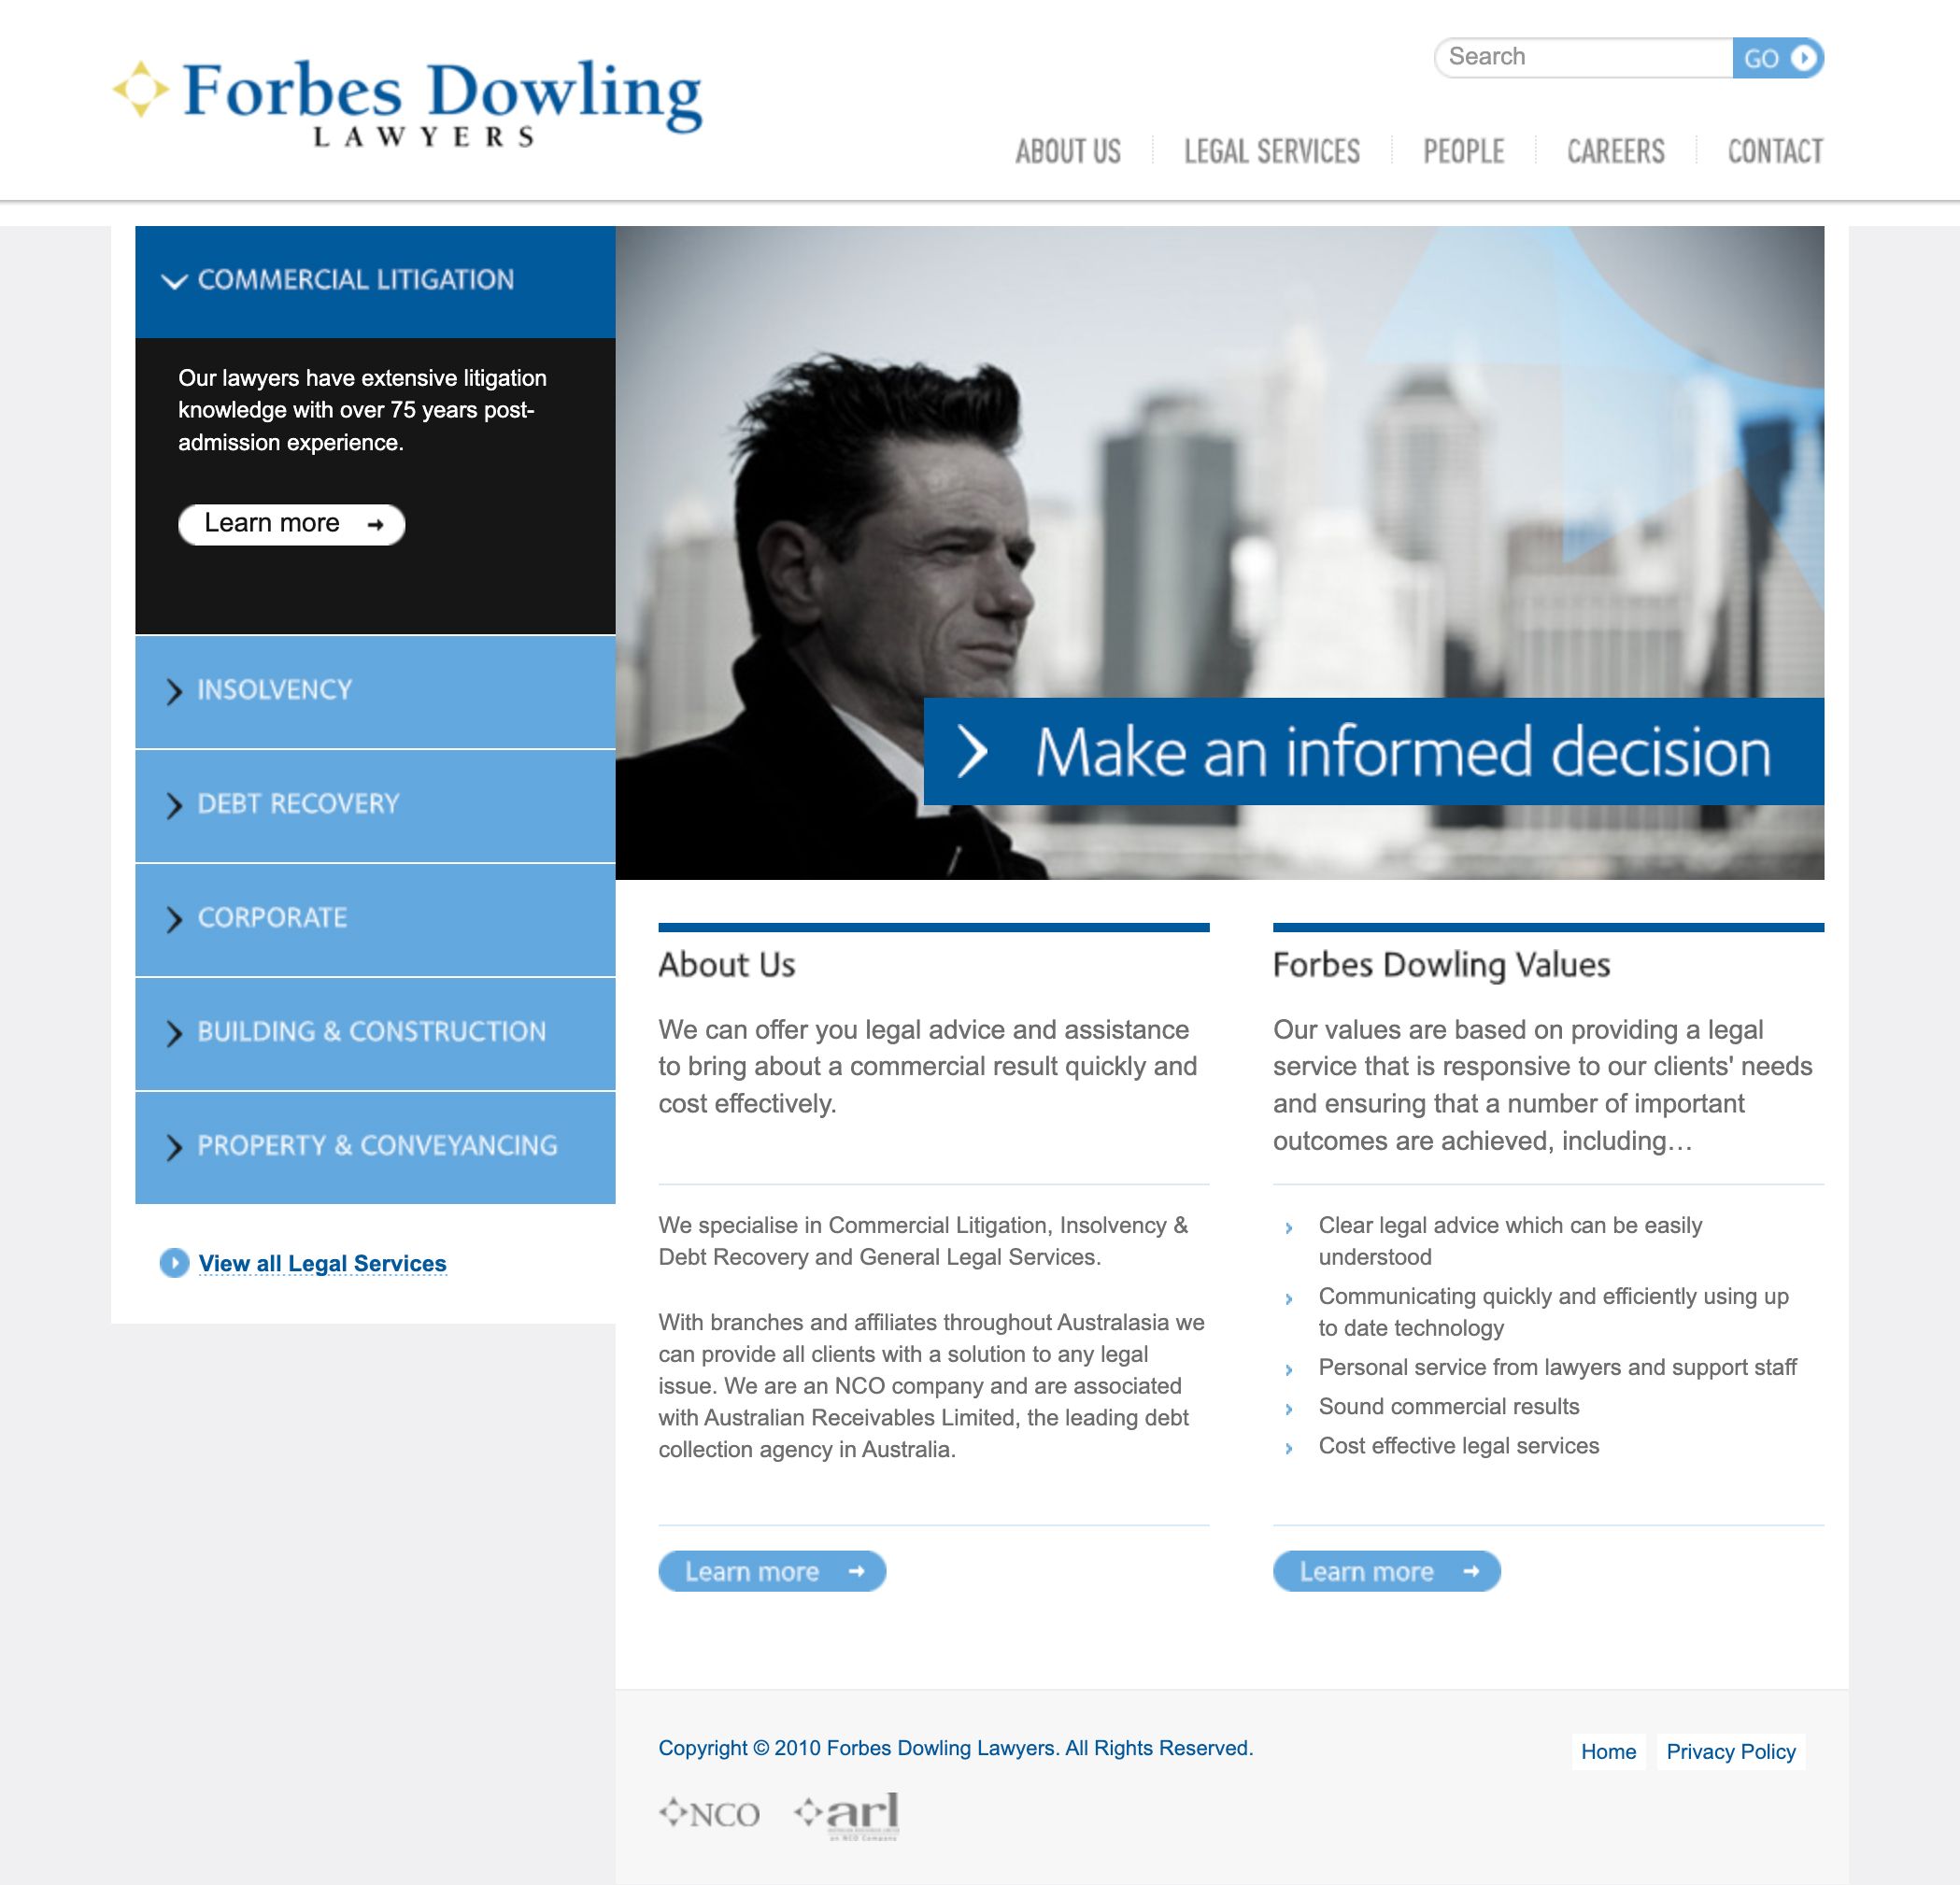 Forbes Dowling Lawyers